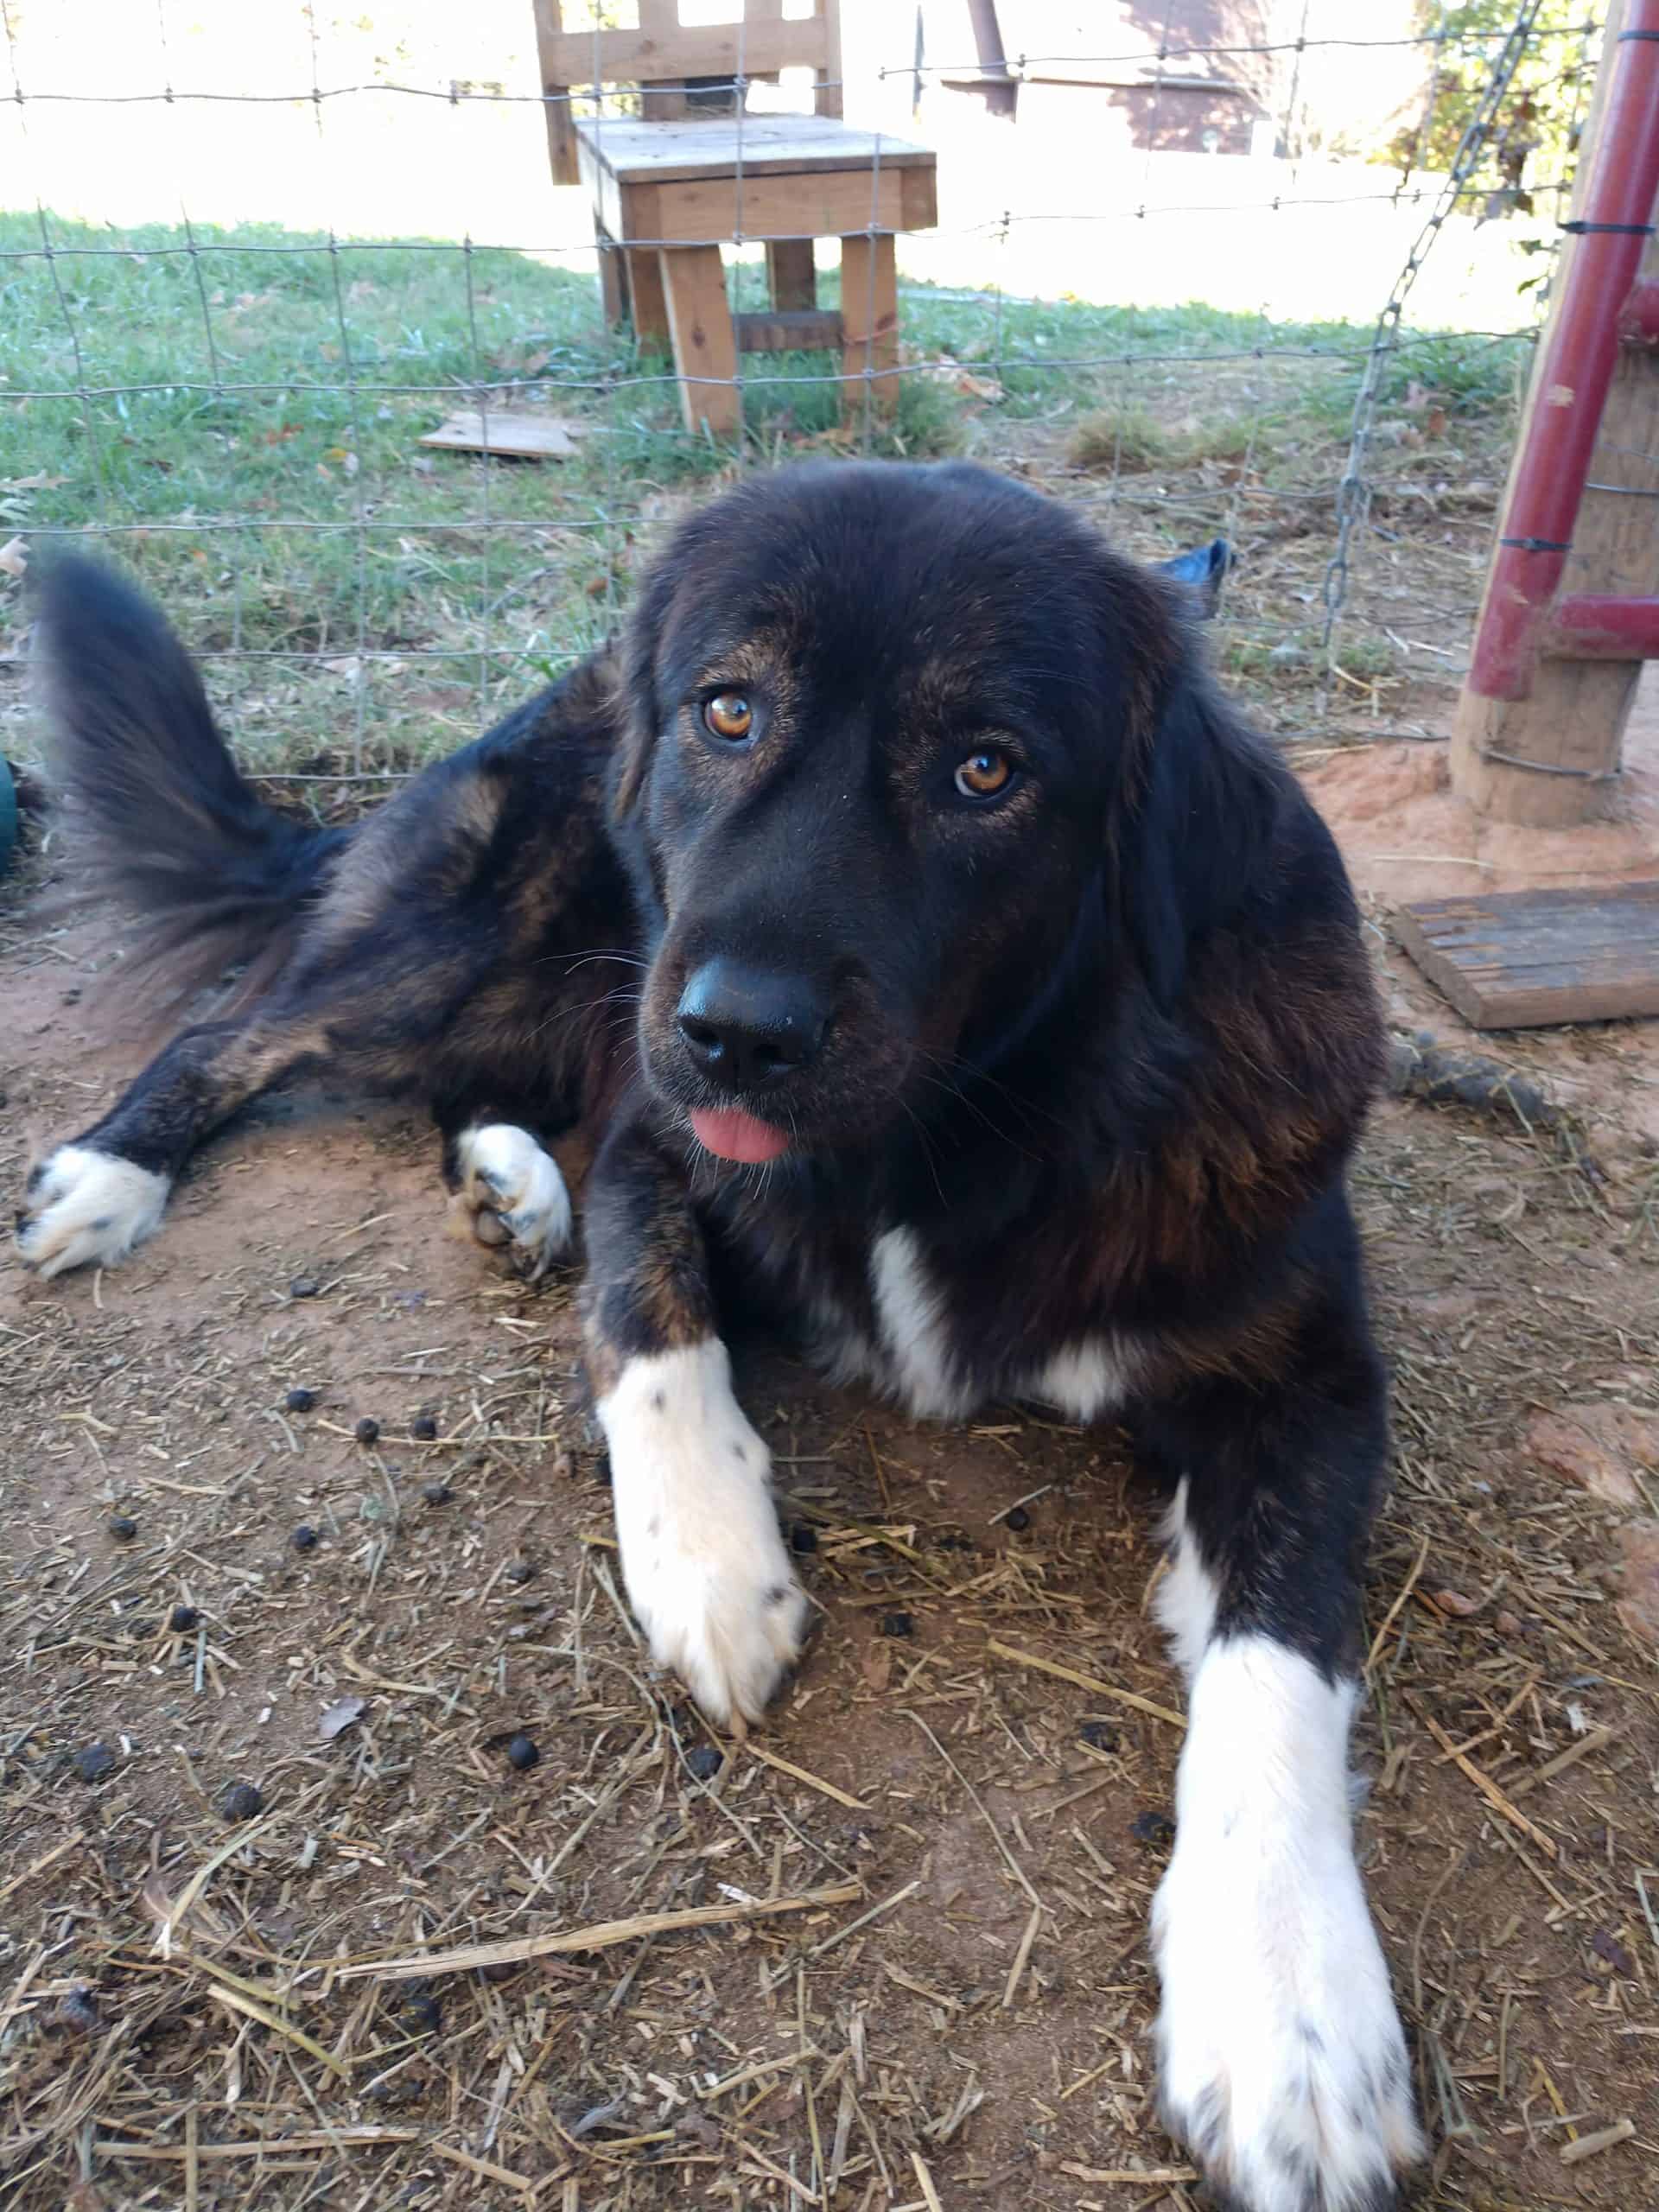 karakachan laying on the ground with tongue out.